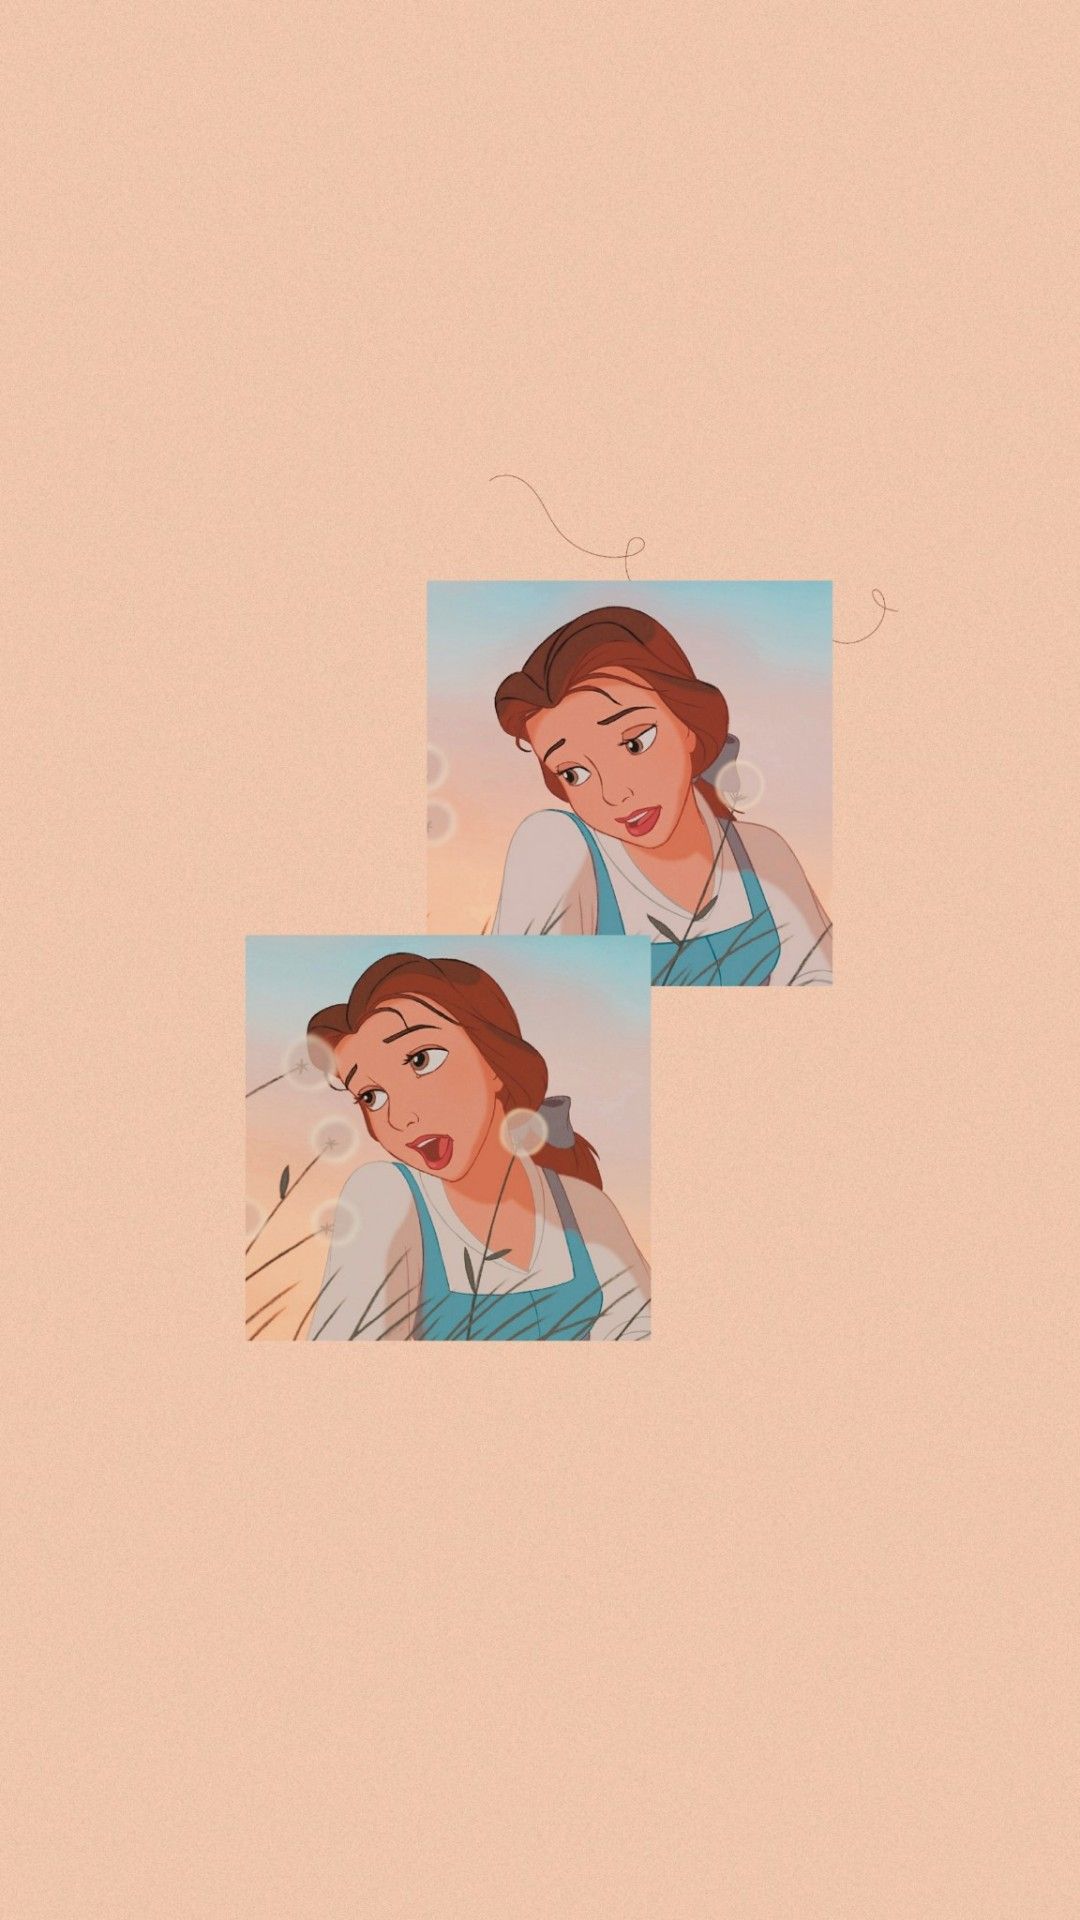 Disney wallpaper aesthetic for phone with Belle from Beauty and the Beast - Belle, Disney